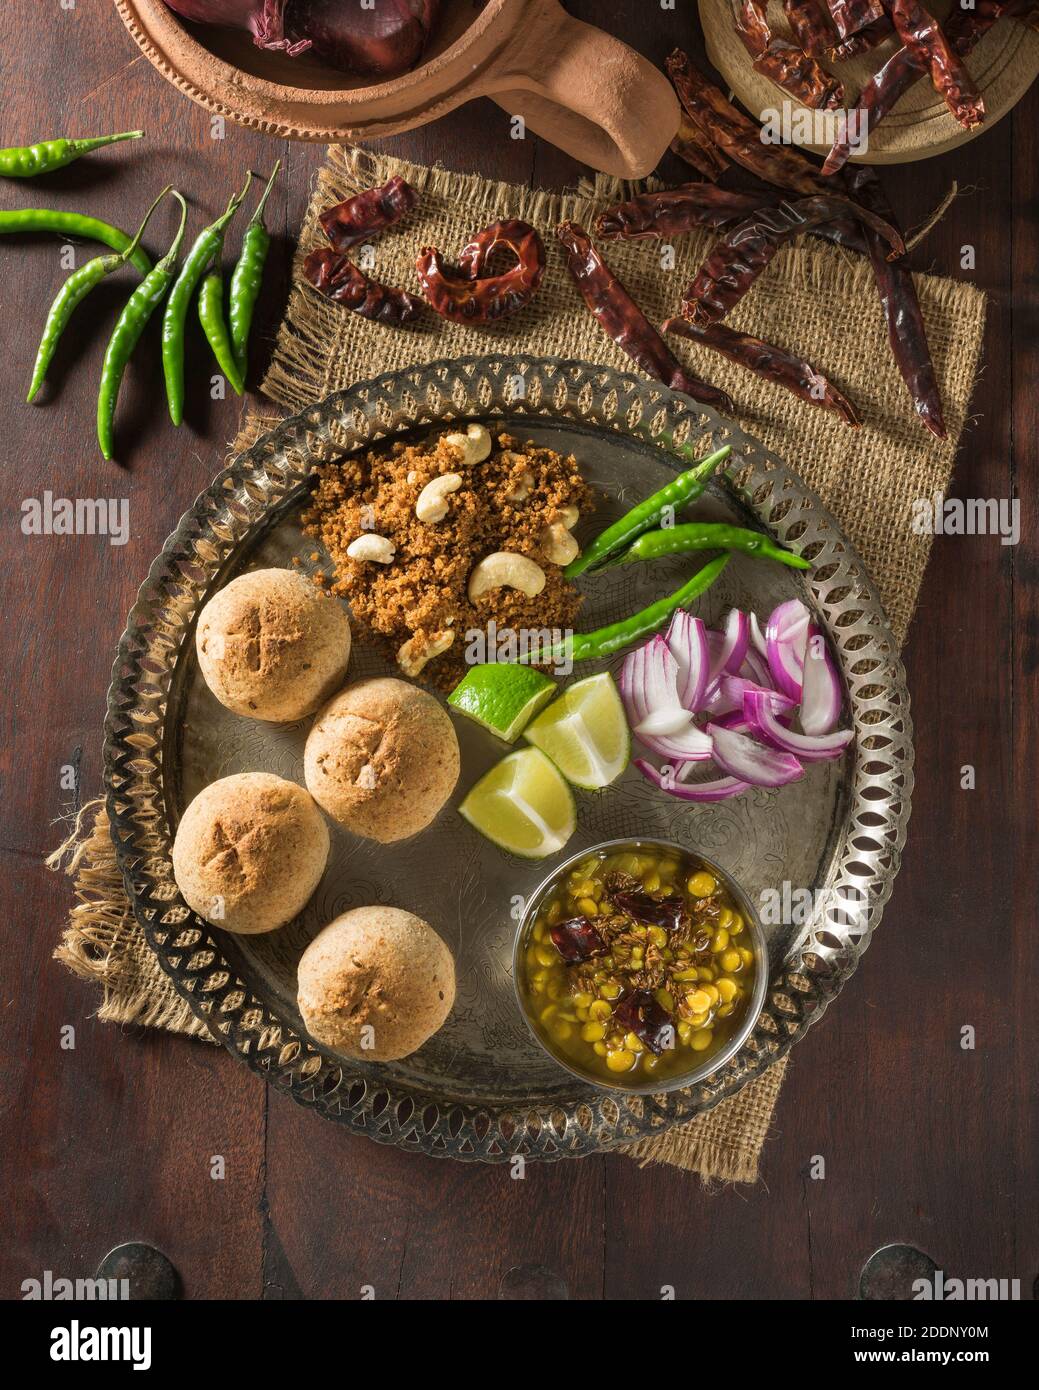 Dal bati. Spicy lentils with wheat flour bread rolls. India Food Stock Photo